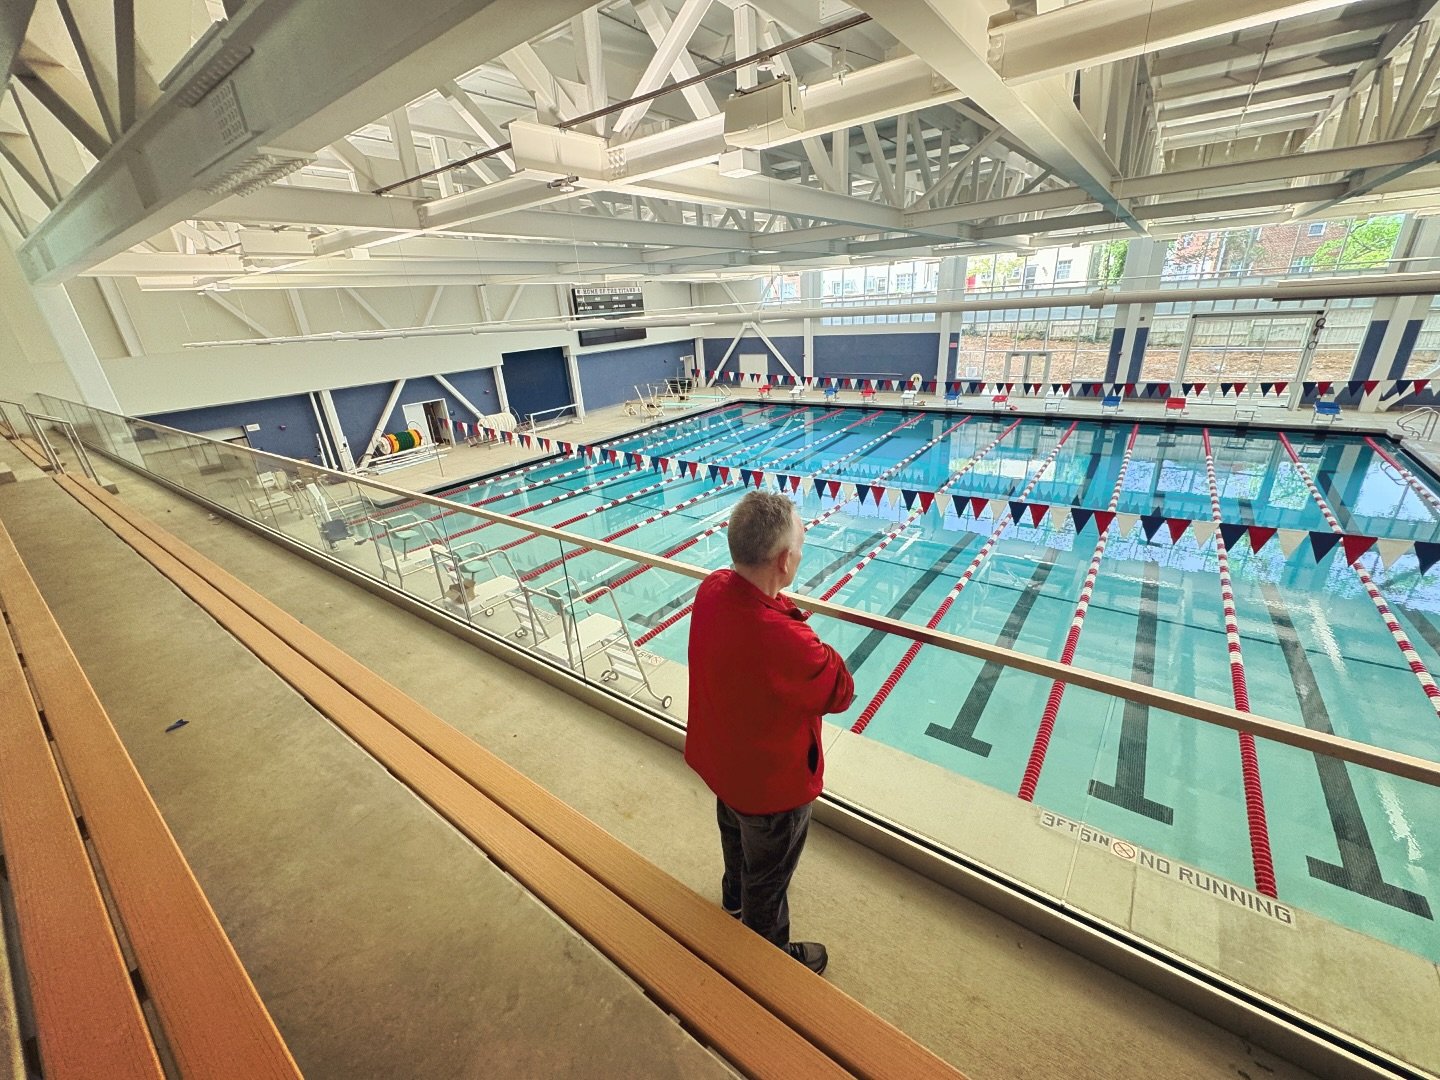 Since @justindotnet already leaked photos from inside the new Minnie Howard, I guess it&rsquo;s now safe to share this photo of @timbeaty remembering his glory days as a Varsity swimmer (and wrestler??) while on a tour of the new building.